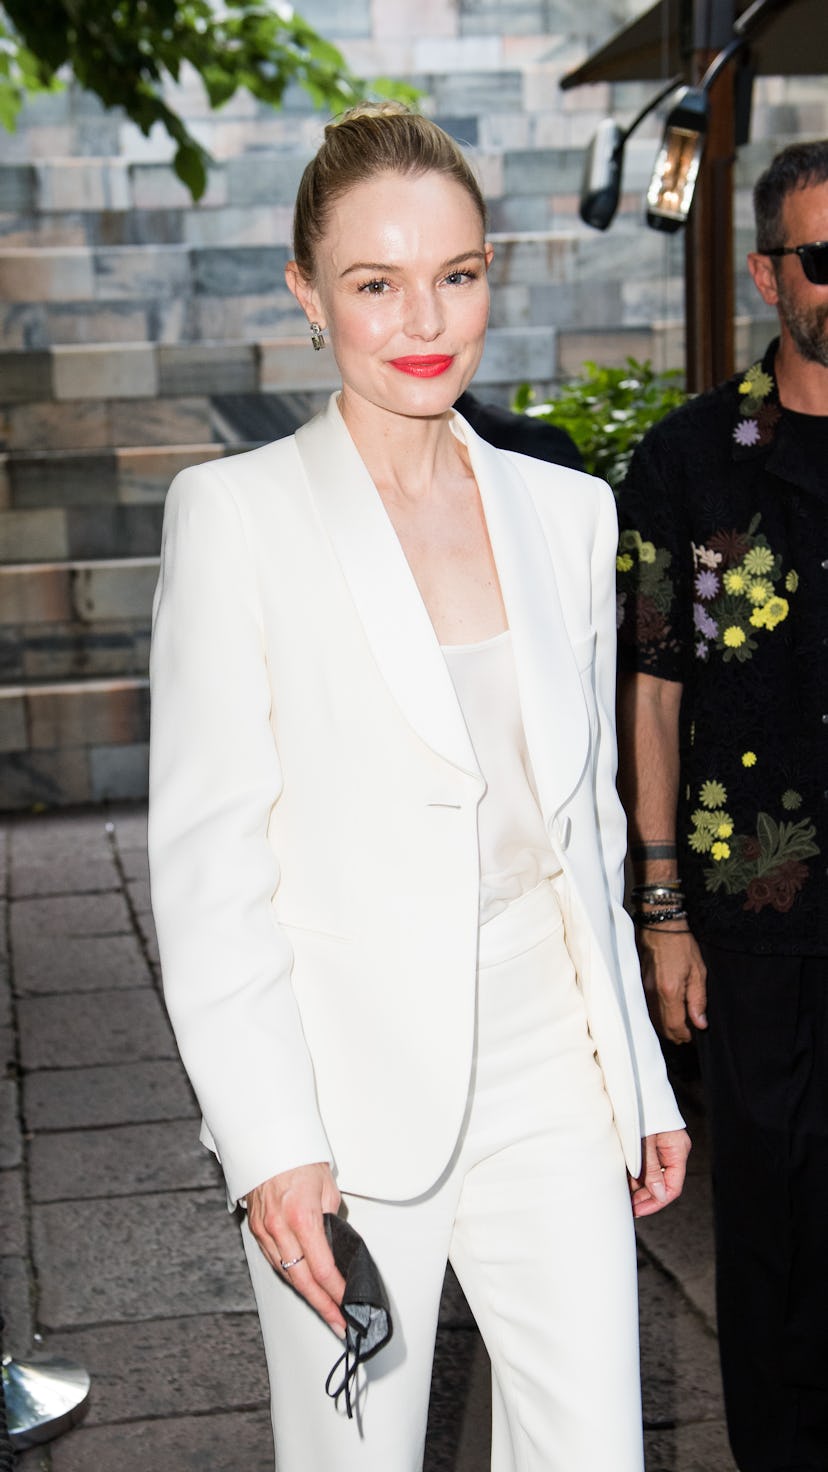 Kate Bosworth is seen arriving at the Giorgio Armani Fashion Show 